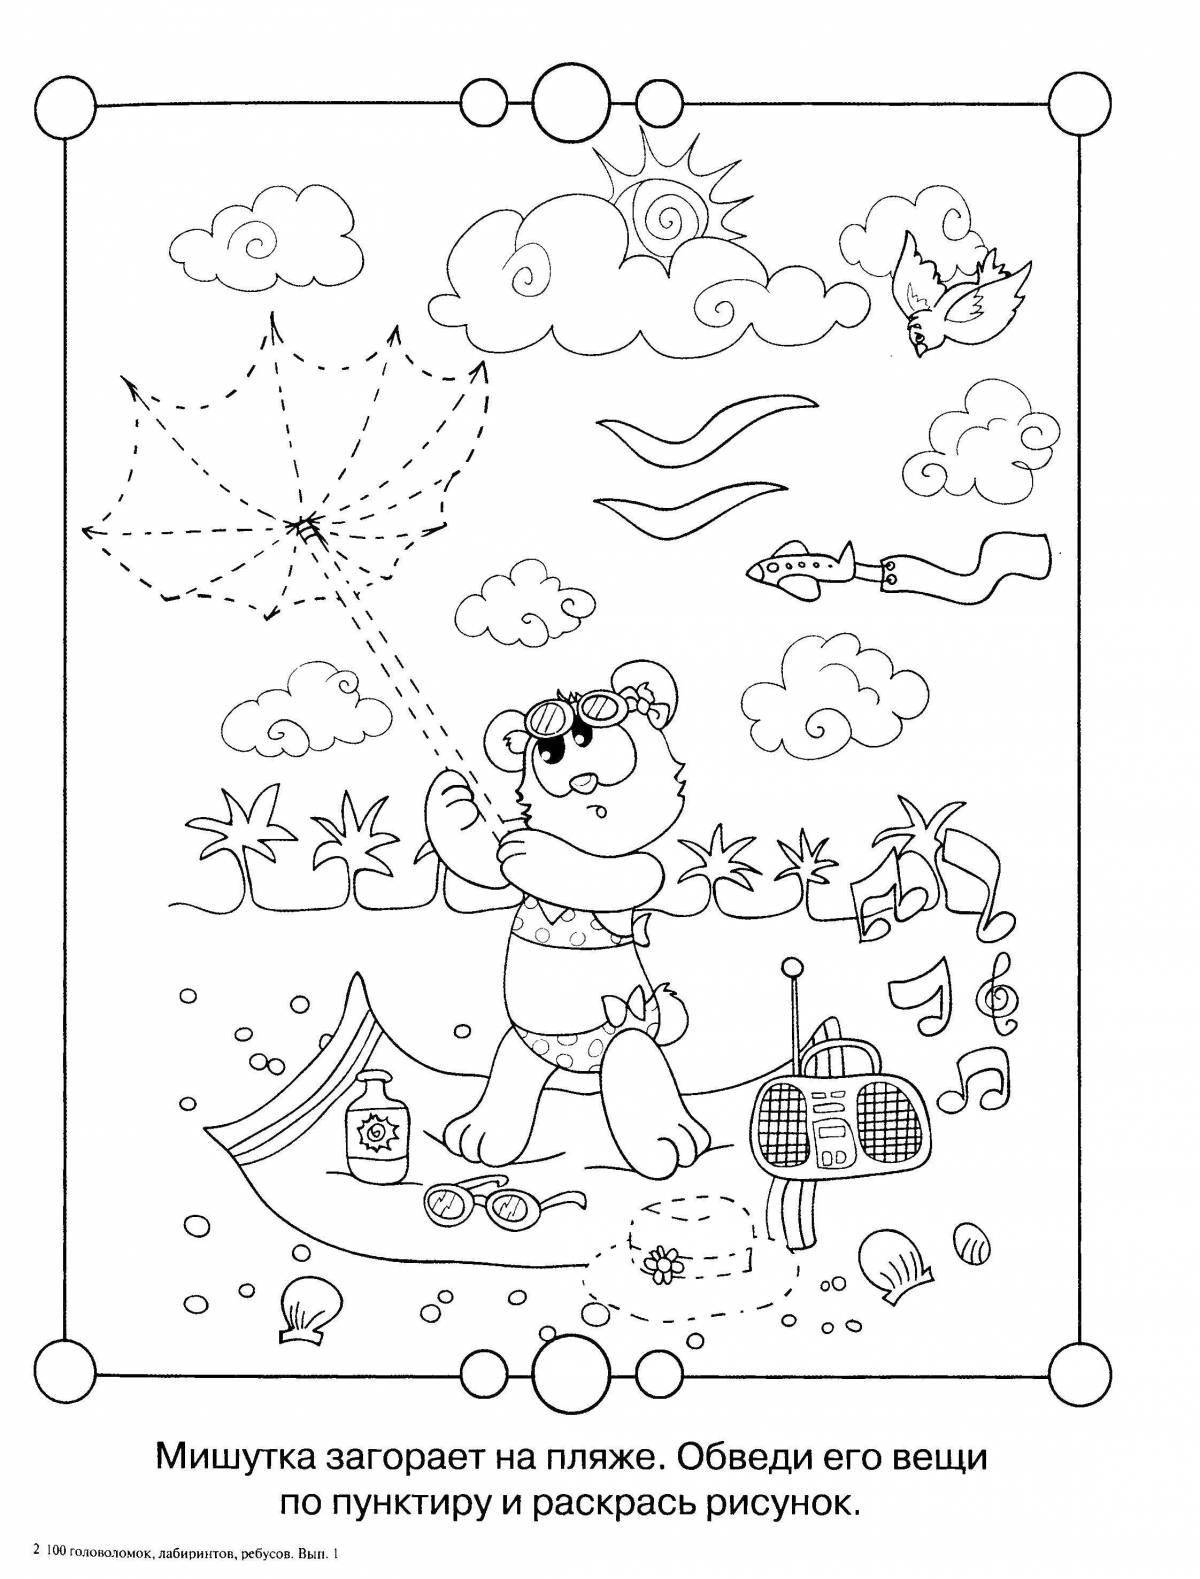 A fascinating coloring book for children logical for 5 years